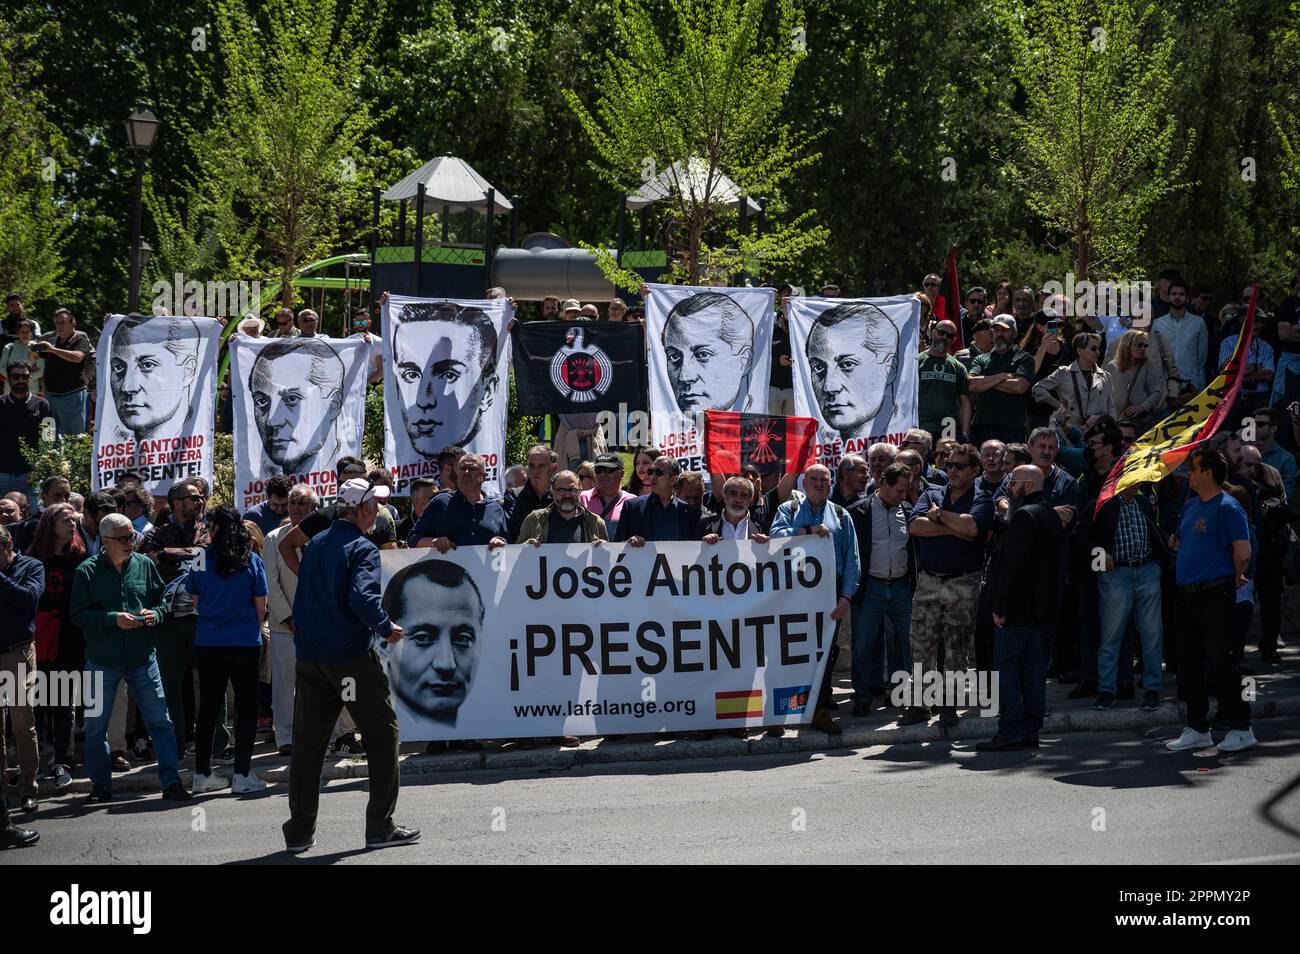 Madrid, Spain. 24th Apr, 2023. Members and supporters of La Falange party carrying banners during a protest outside the San Isidro Cemetery the day of the exhumation of the remains of the founder of Falange, Jose Antonio Primo de Rivera. The fascist politician's remains were exhumed from the Valle de los Caidos (known now as Valle de Cuelgamuros) and transferred to the San Isidro cemetery. Credit: Marcos del Mazo/Alamy Live News Stock Photo